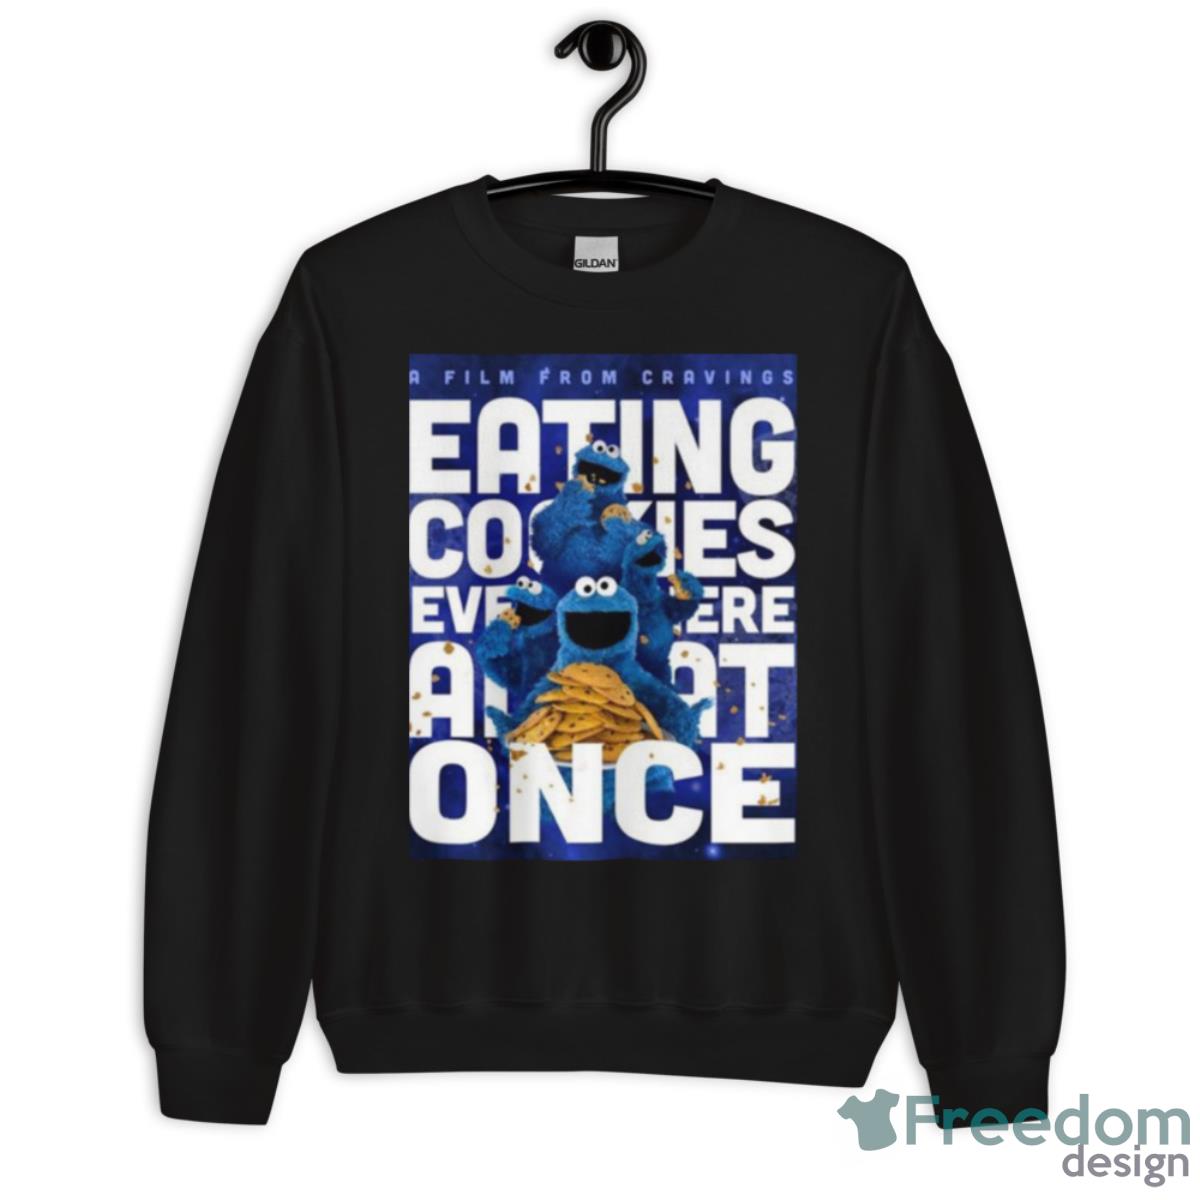 A Film From Cravings Eating Cookies Everywhere AAt Once Shirt